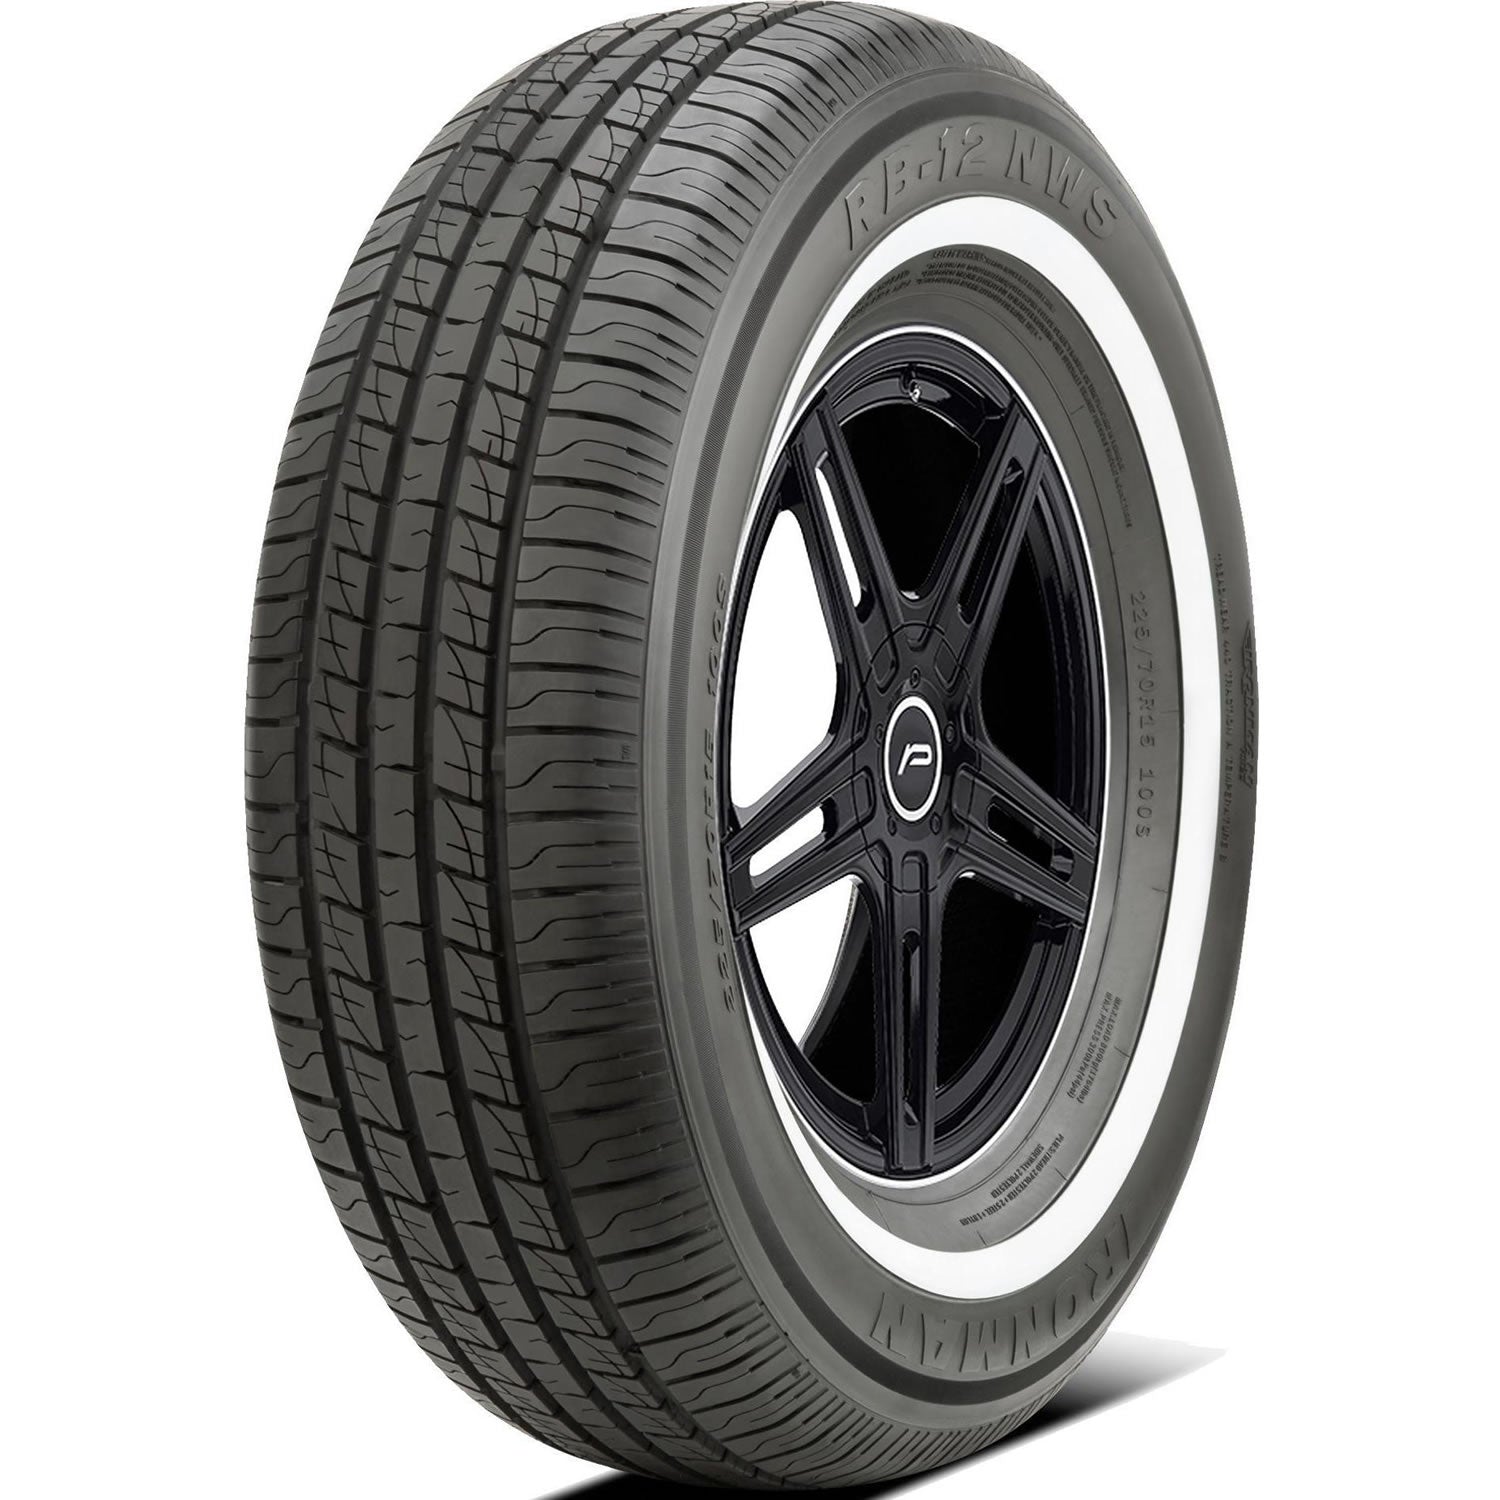 IRONMAN RB-12 NWS 225/70R15 (27.4X8.9R 15) Tires